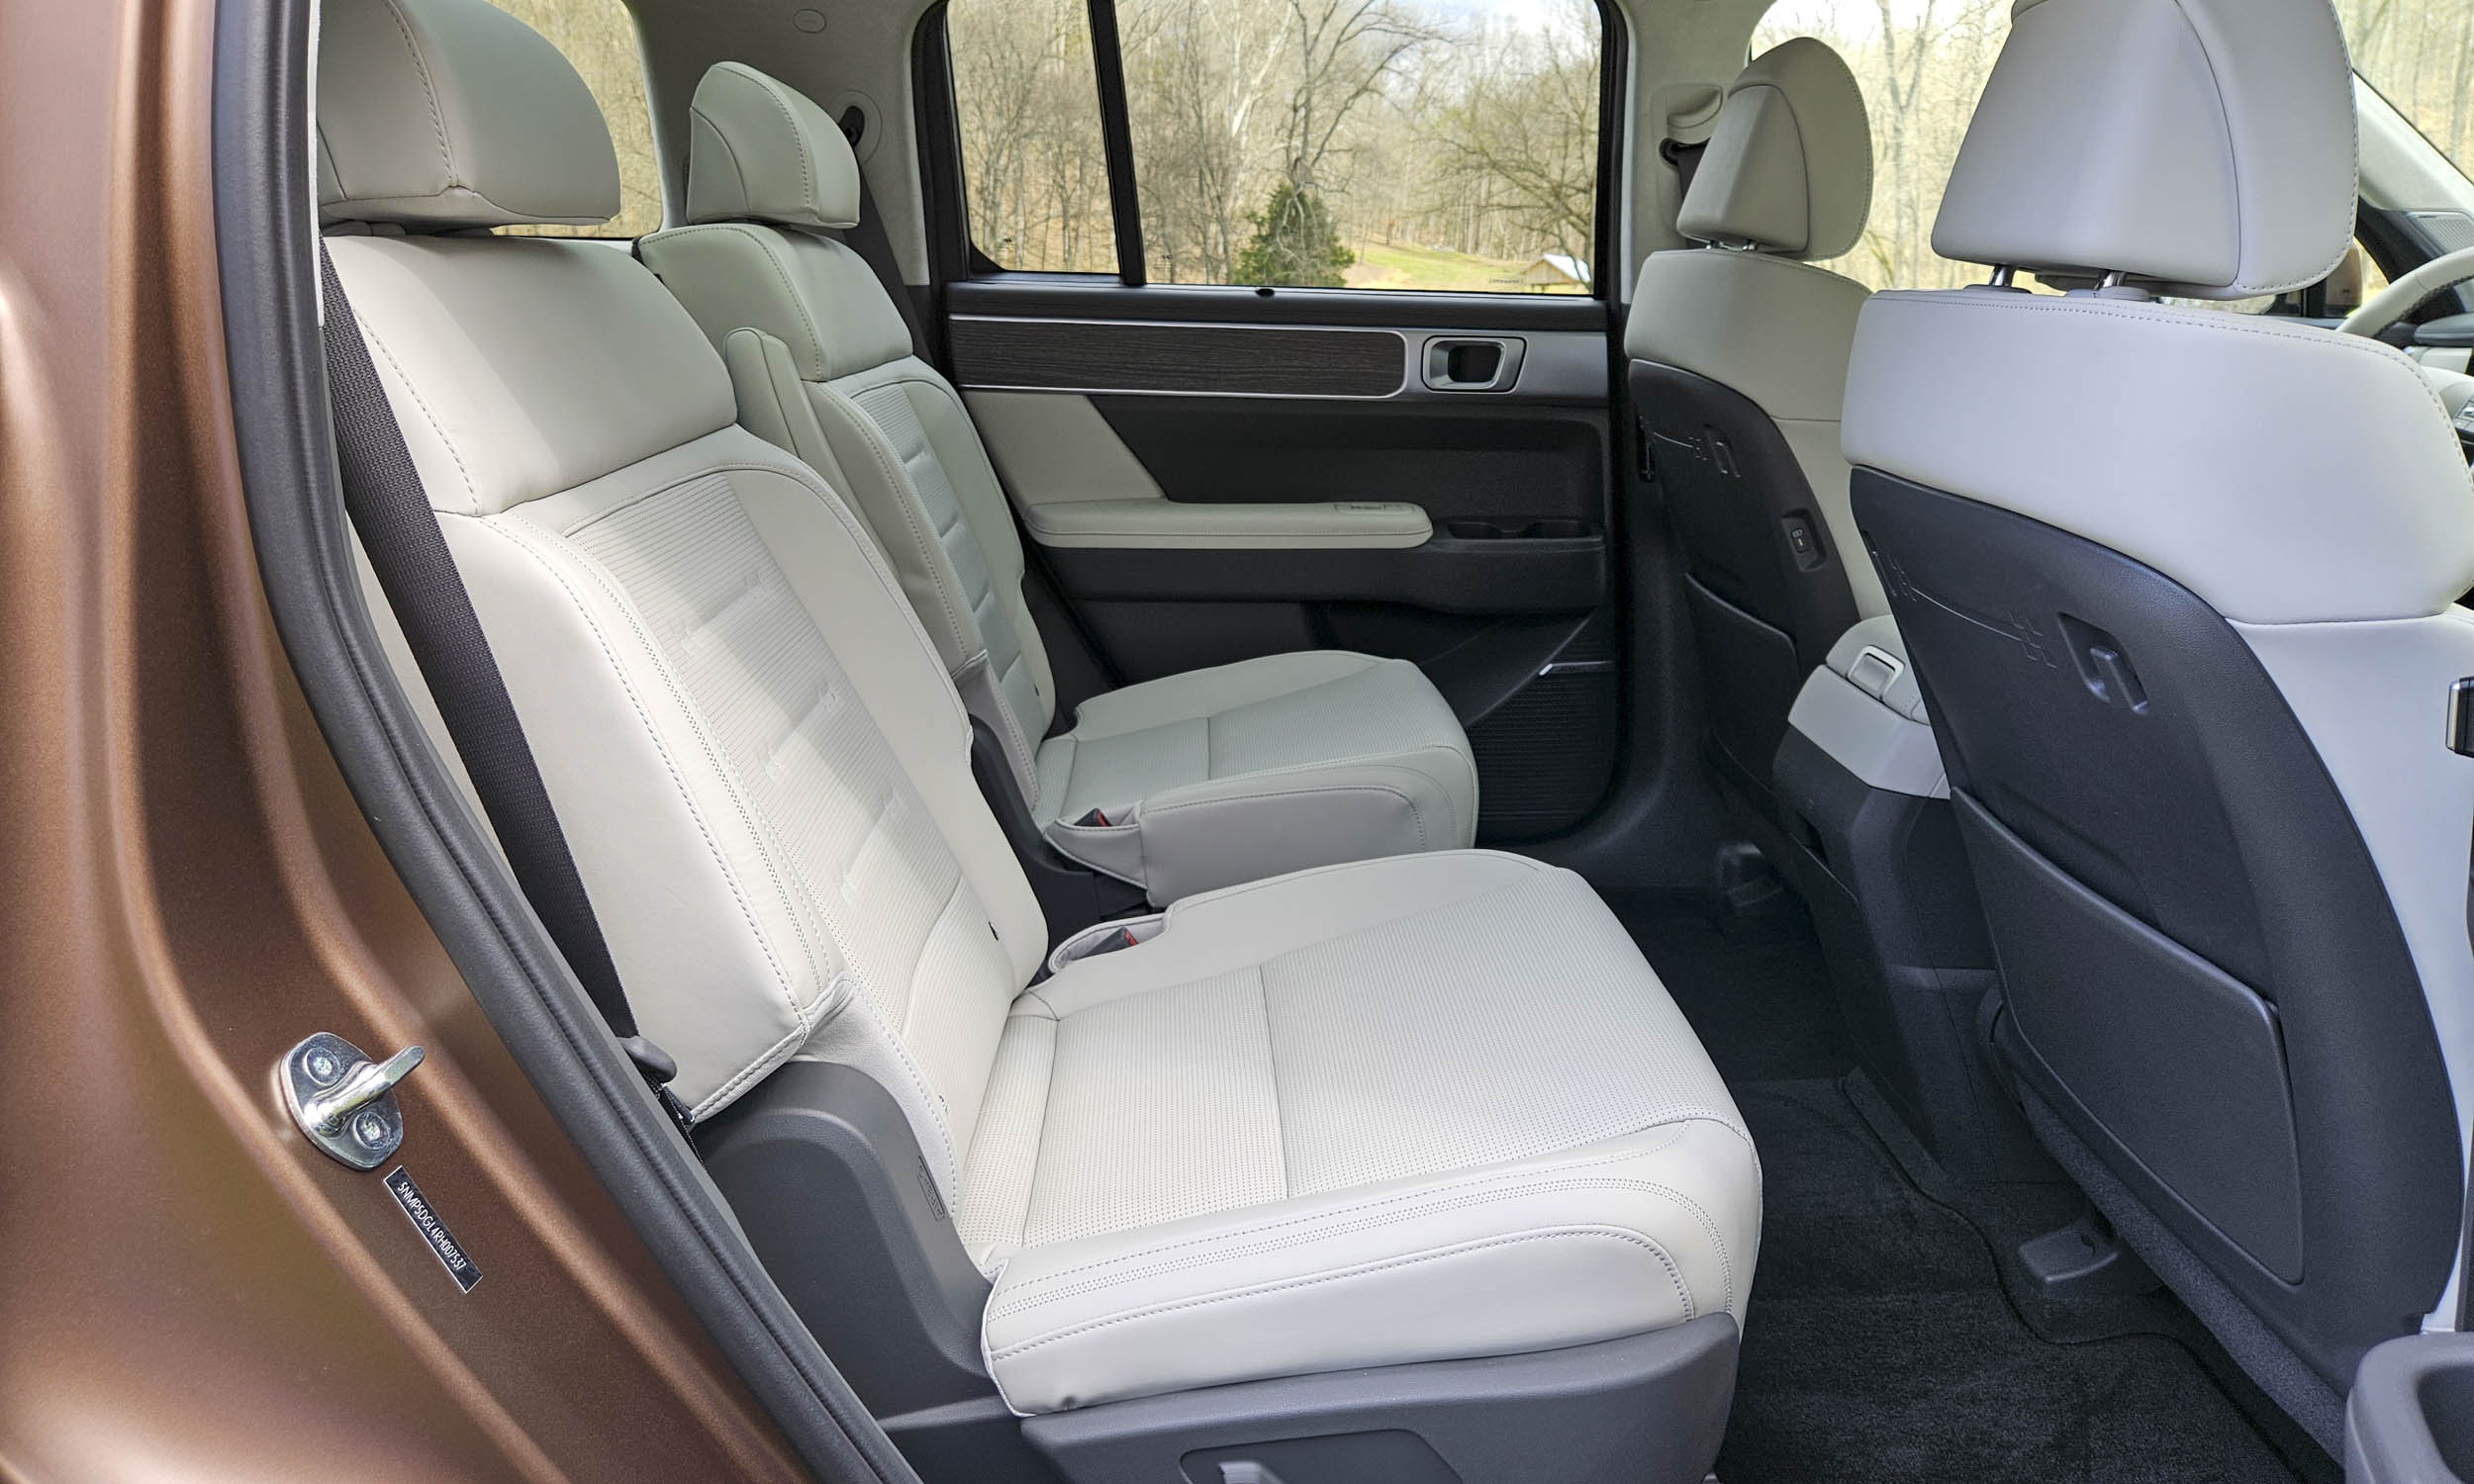 <p>          A three-passenger bench seat is standard in all trims except the Calligraphy, which has dual captain’s chairs. There’s plenty of legroom and headroom, and rear seat heaters are available for added comfort. Dual USB ports keep devices charged for rear seat passengers.         </p>